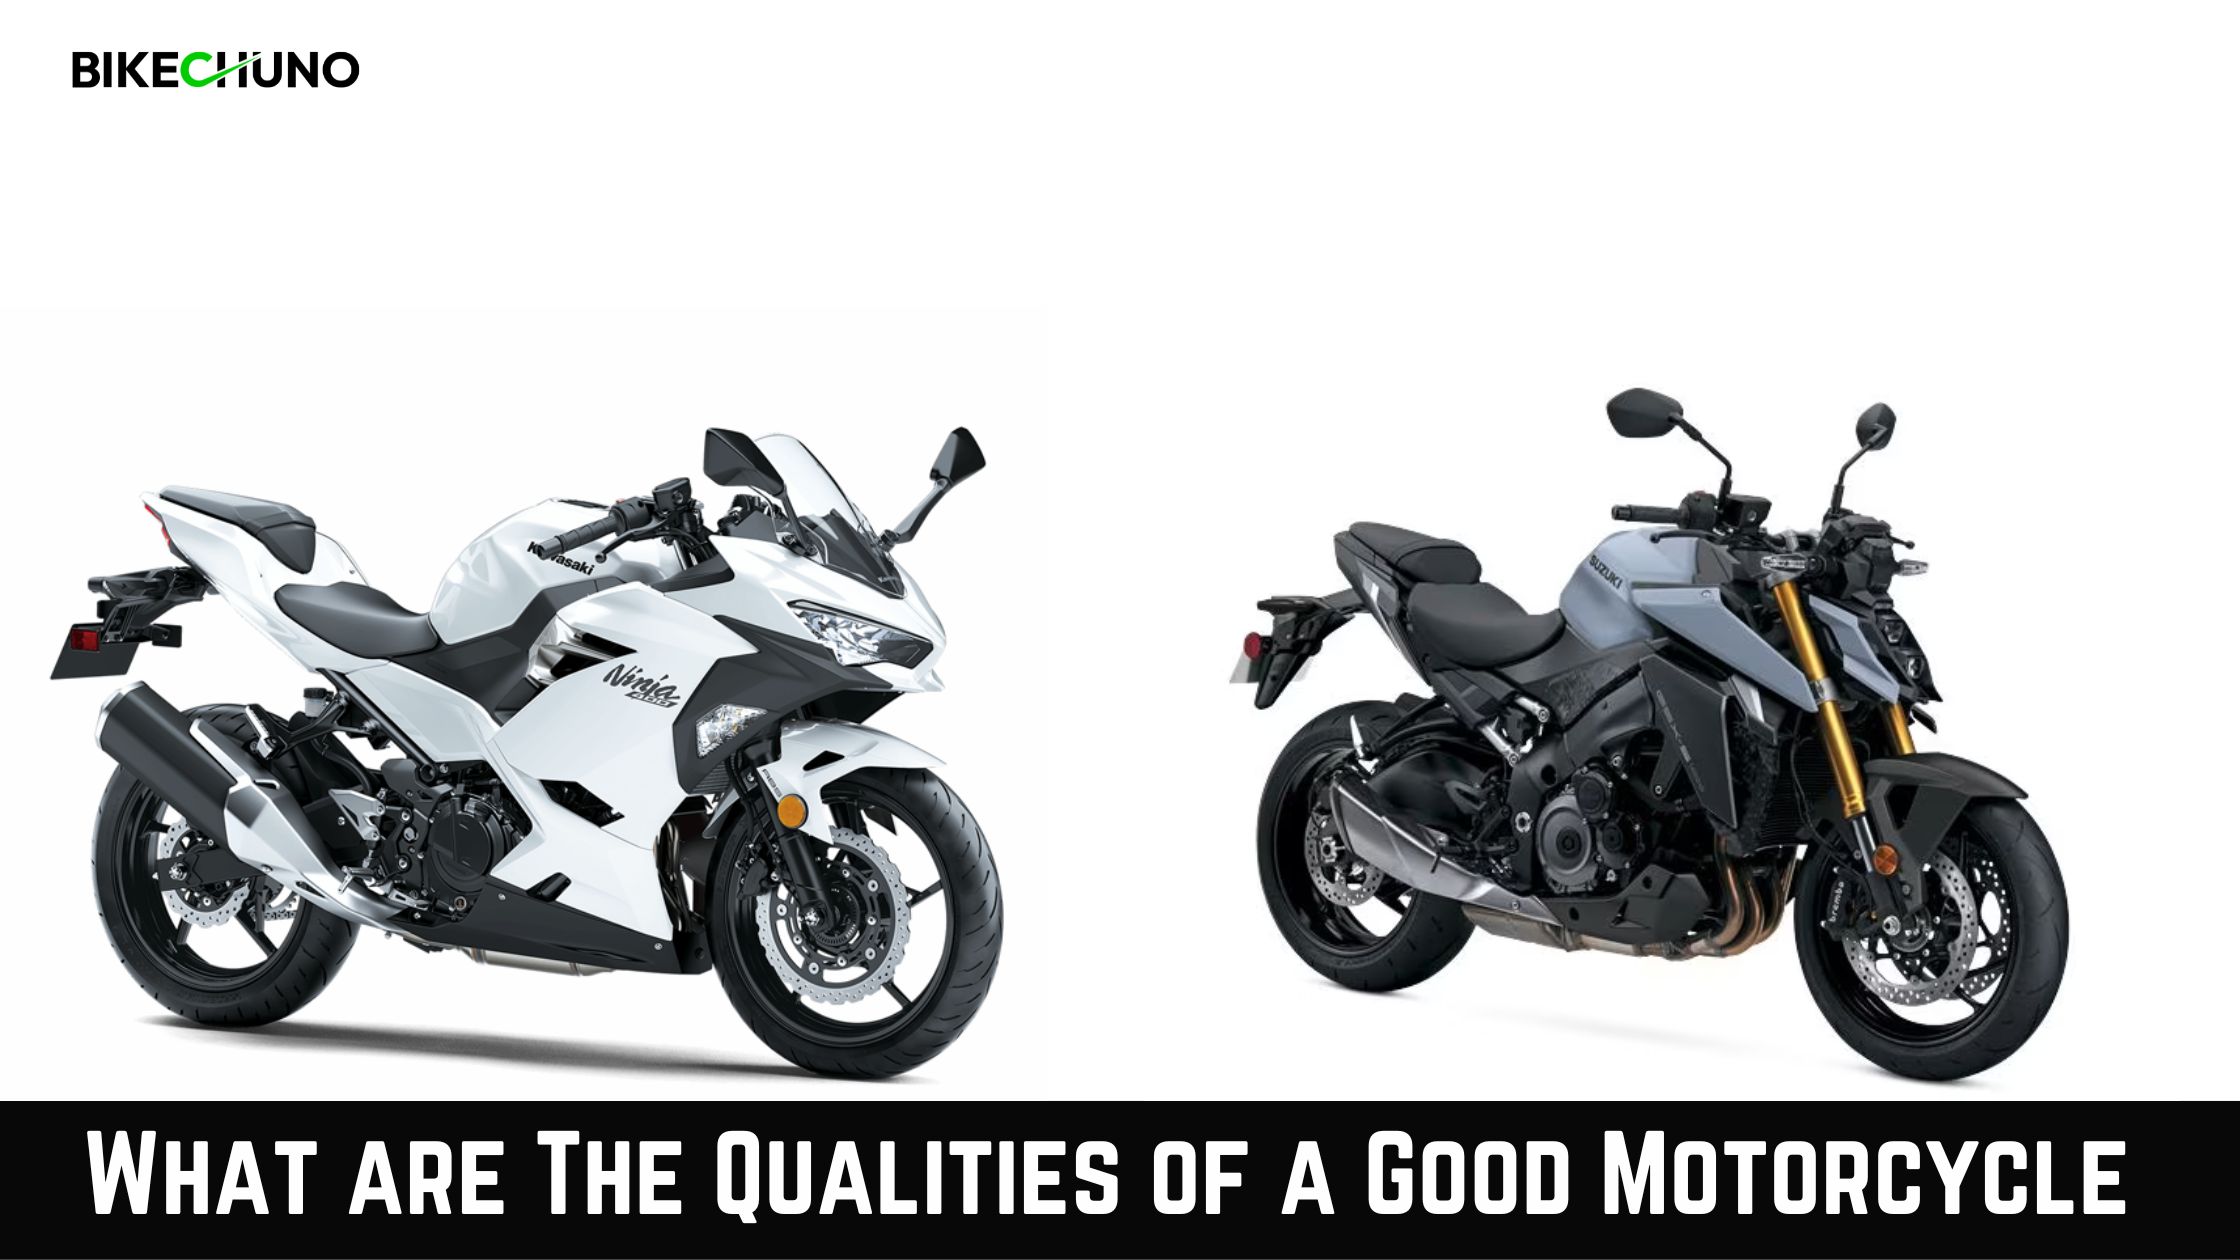 Qualities Of A Good Motorcycle?